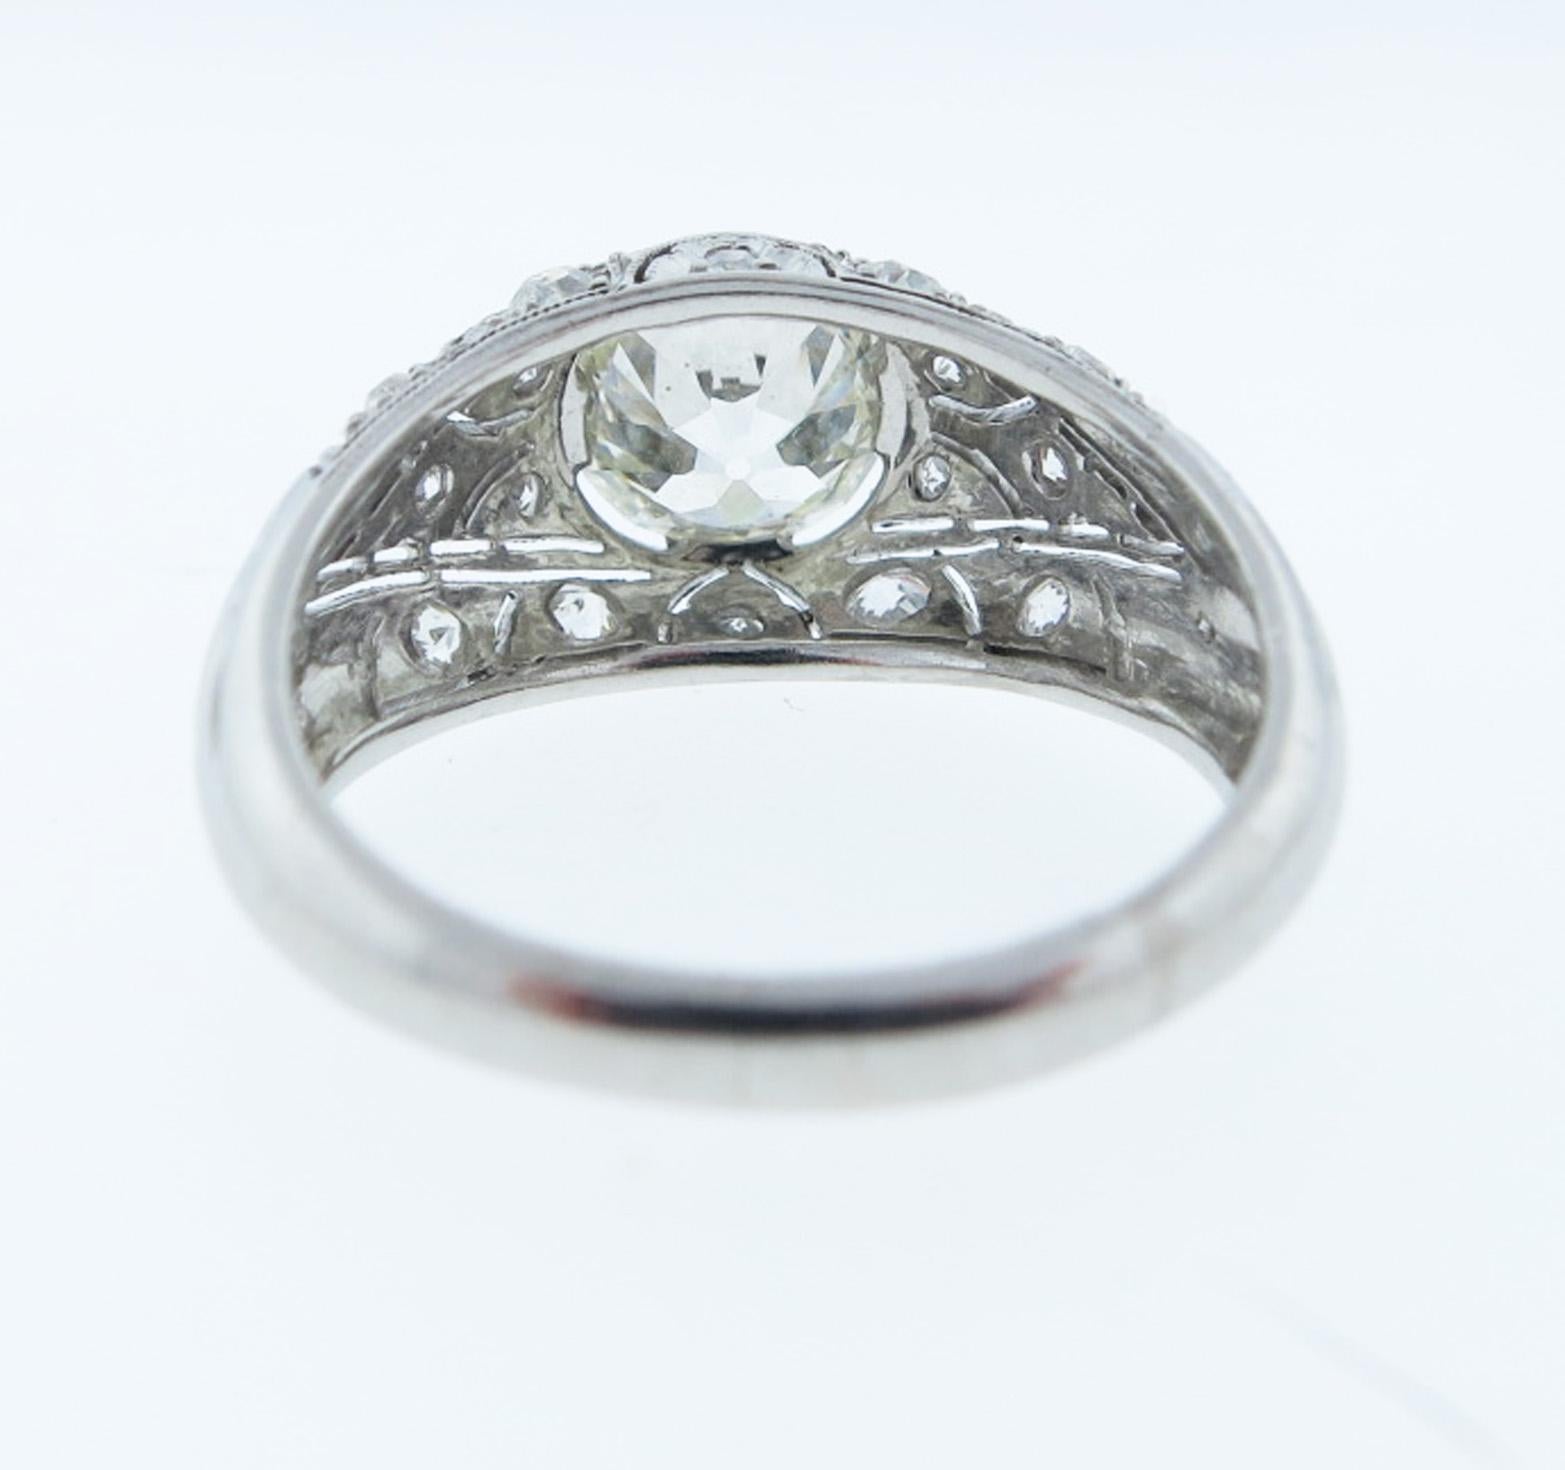 Beautiful Art Deco handmade platinum mount diamond ring, the center is bezel set with a round old European cut diamond weighing approx. 1.55 cts. grading VS clarity J color. The pierced work mount is bead set with 16 European cut diamonds totaling